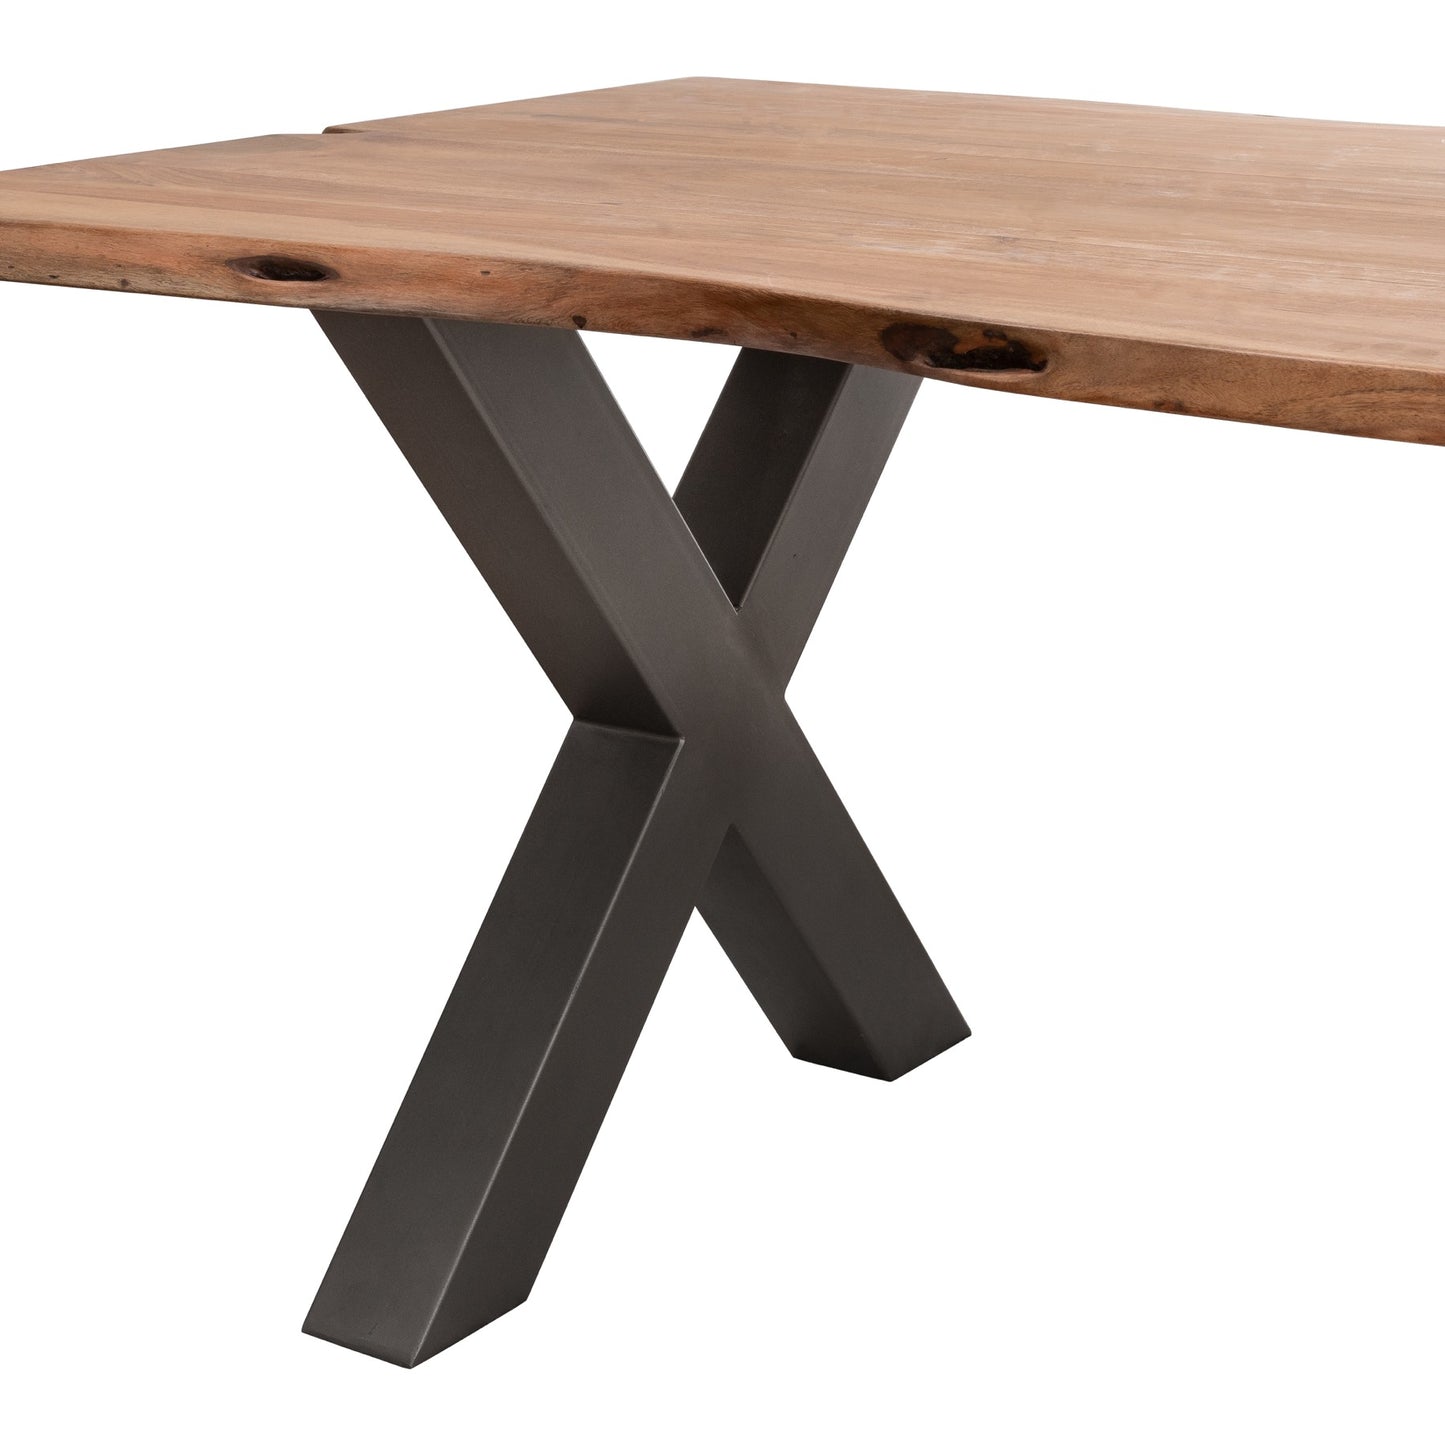 Carpenter Collection Dining Table